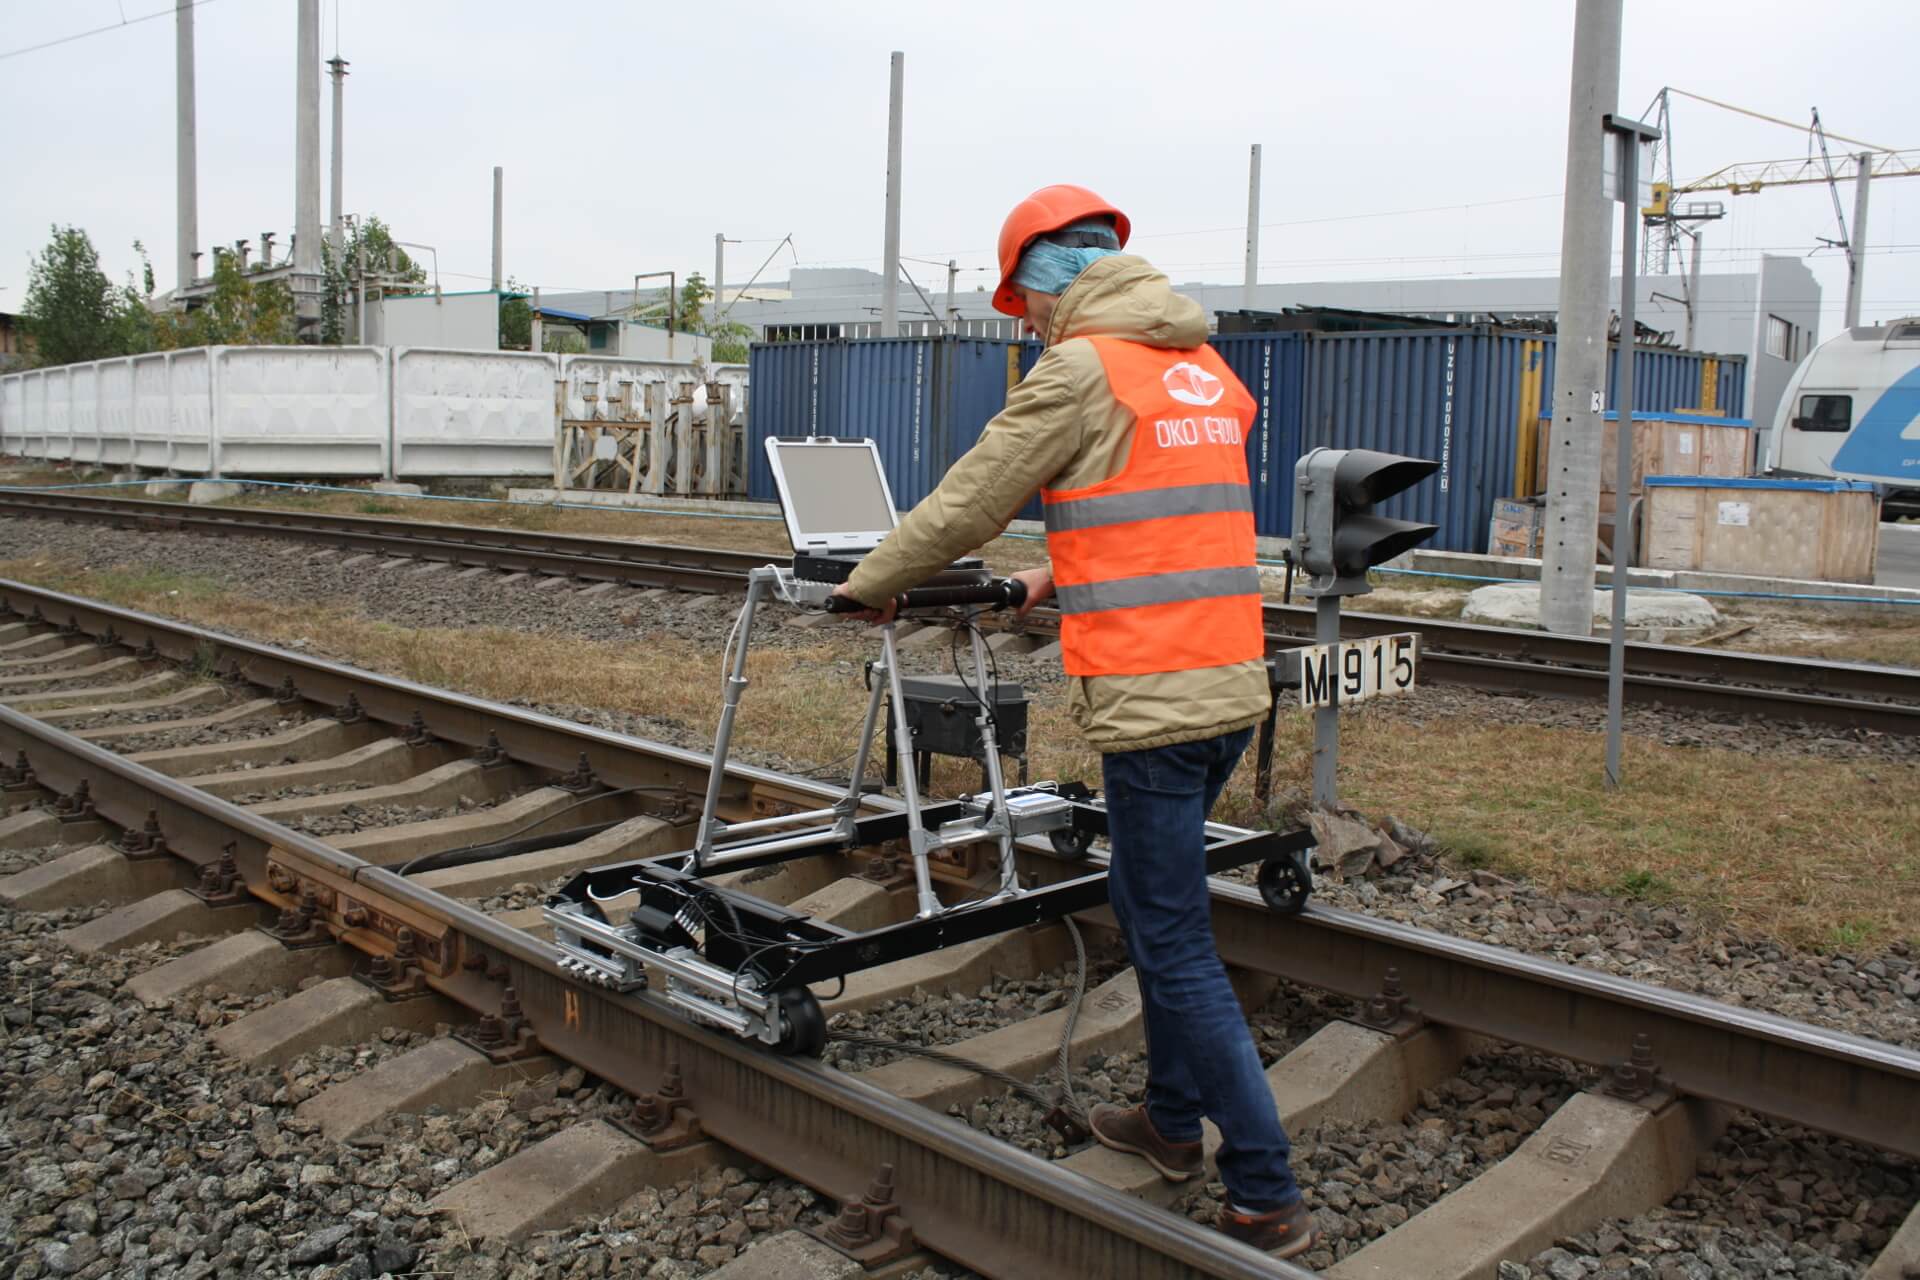 Inspection of the track segment with ETS2-77 flaw detector for gauge corner checking